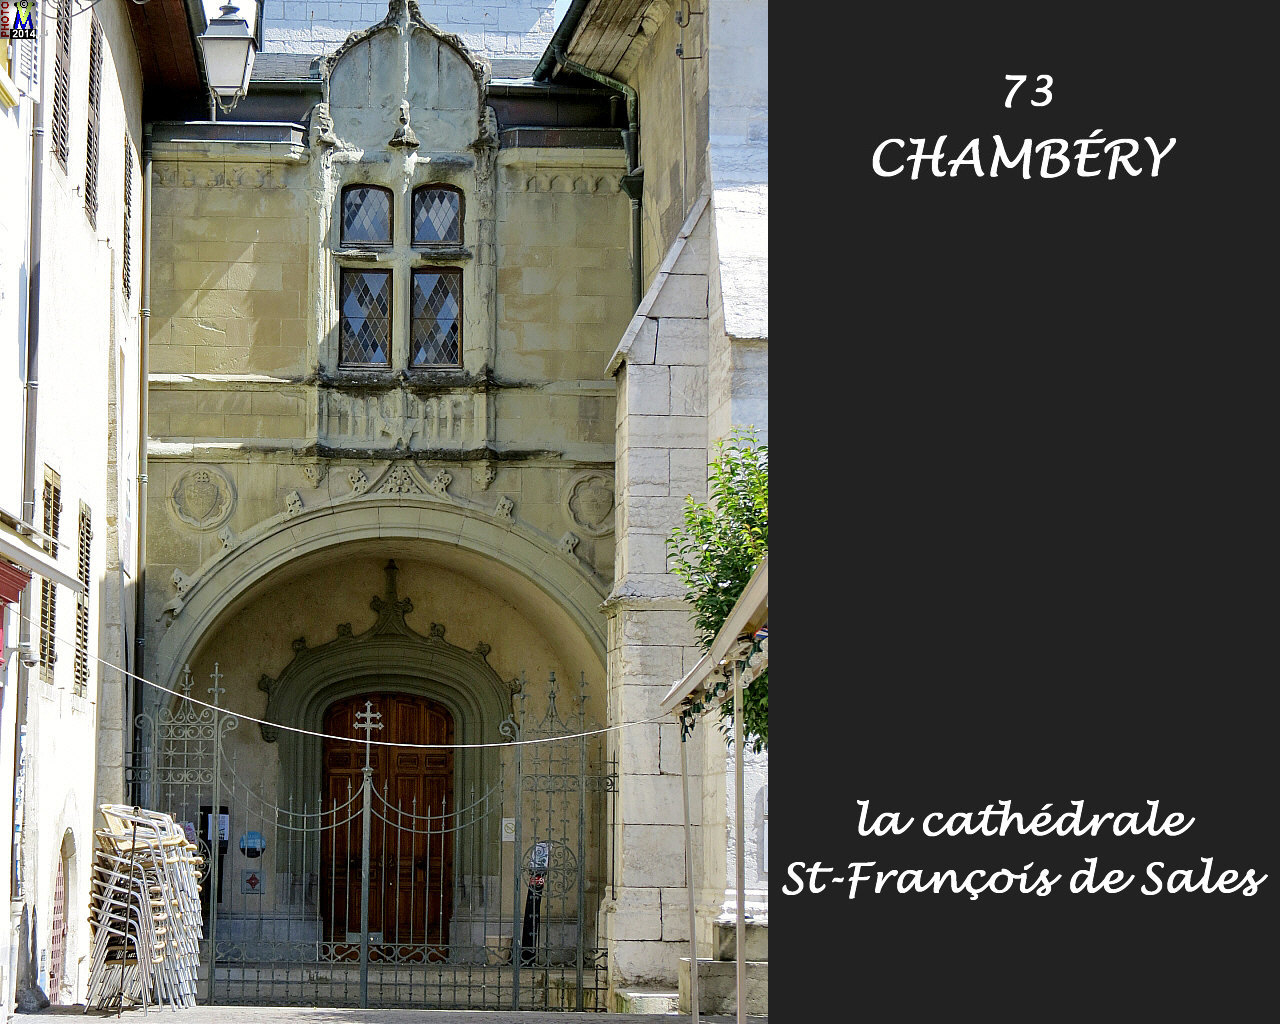 73CHAMBERY_cathedrale_107.jpg